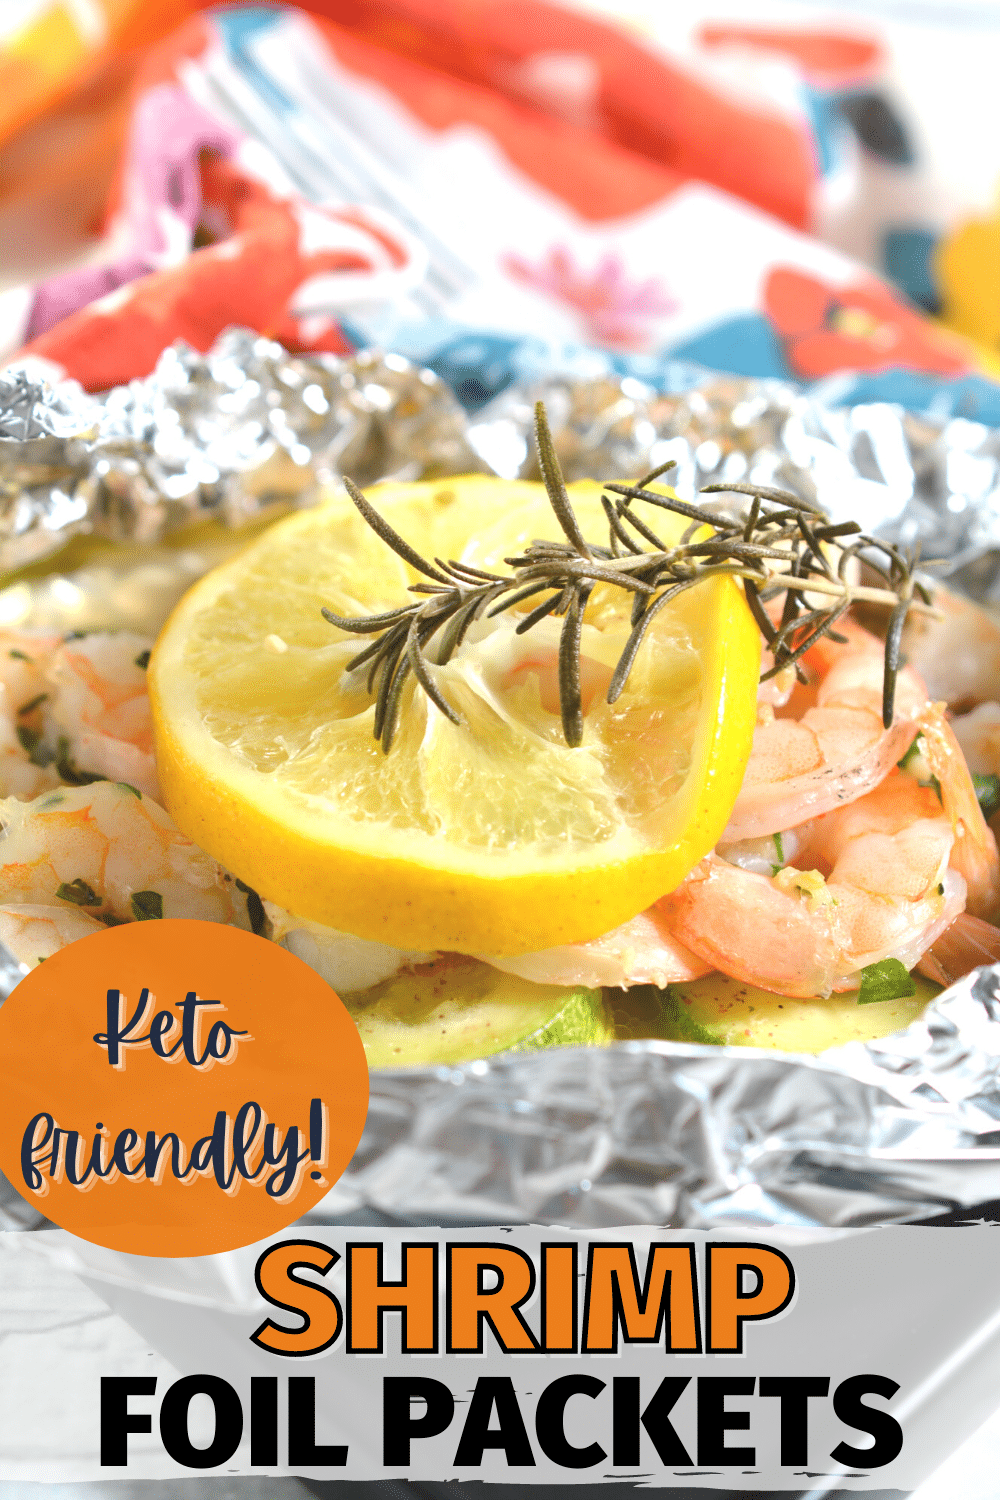 Keto Shrimp Foil Packets are a quick and easy way to get a healthy dinner on the table. This keto friendly meal is family friendly and mess free! #shrimp #foilpackets #keto via @wondermomwannab